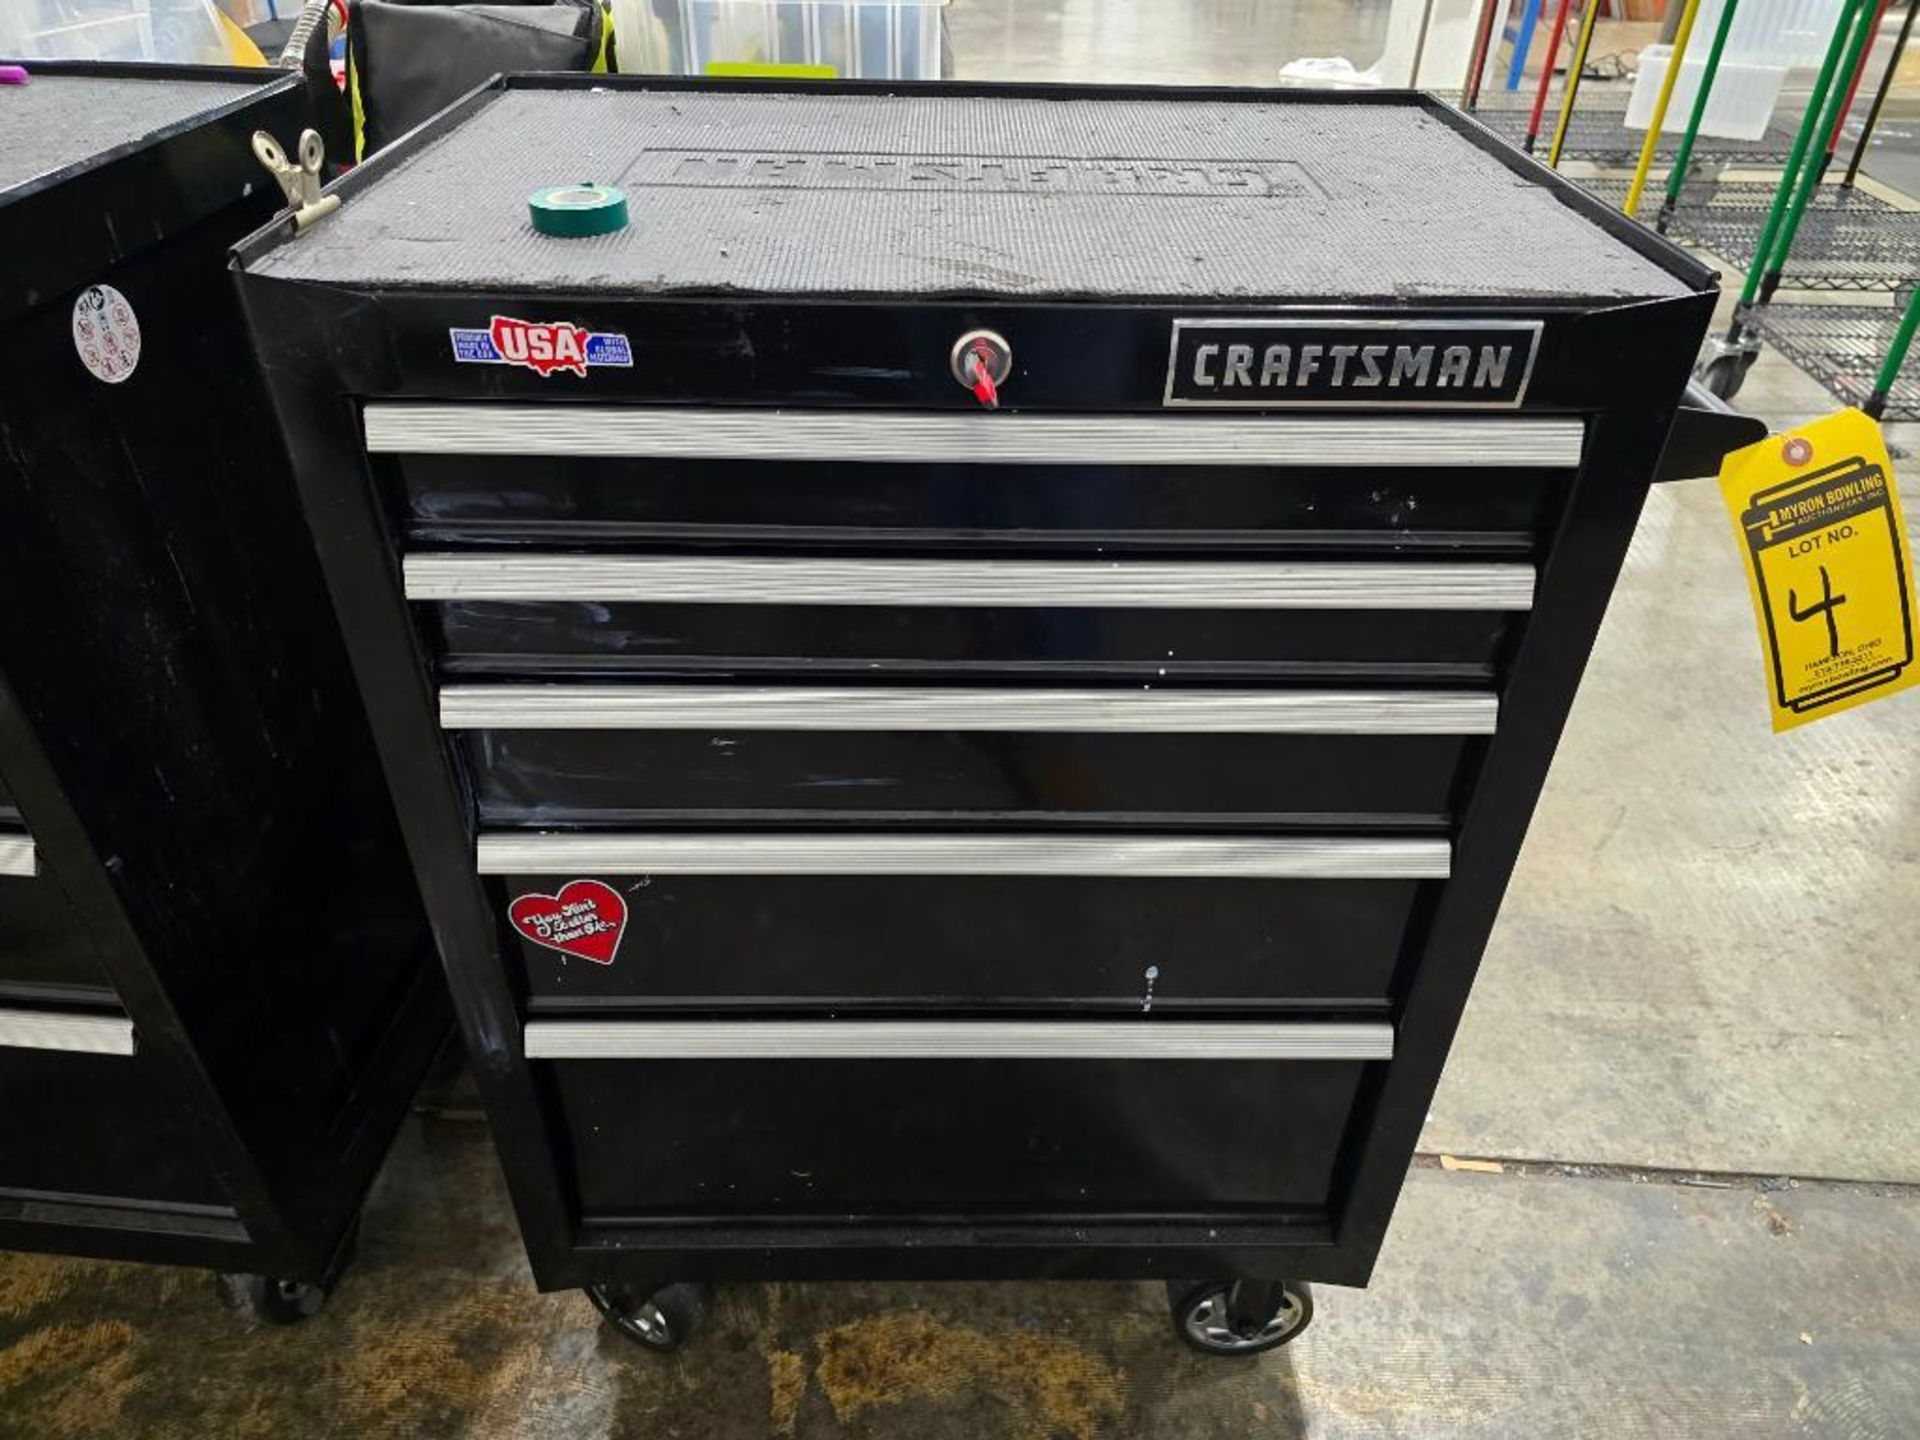 Craftsman 5-Drawer Rolling Tool Cabinet w/ Contents (Black)